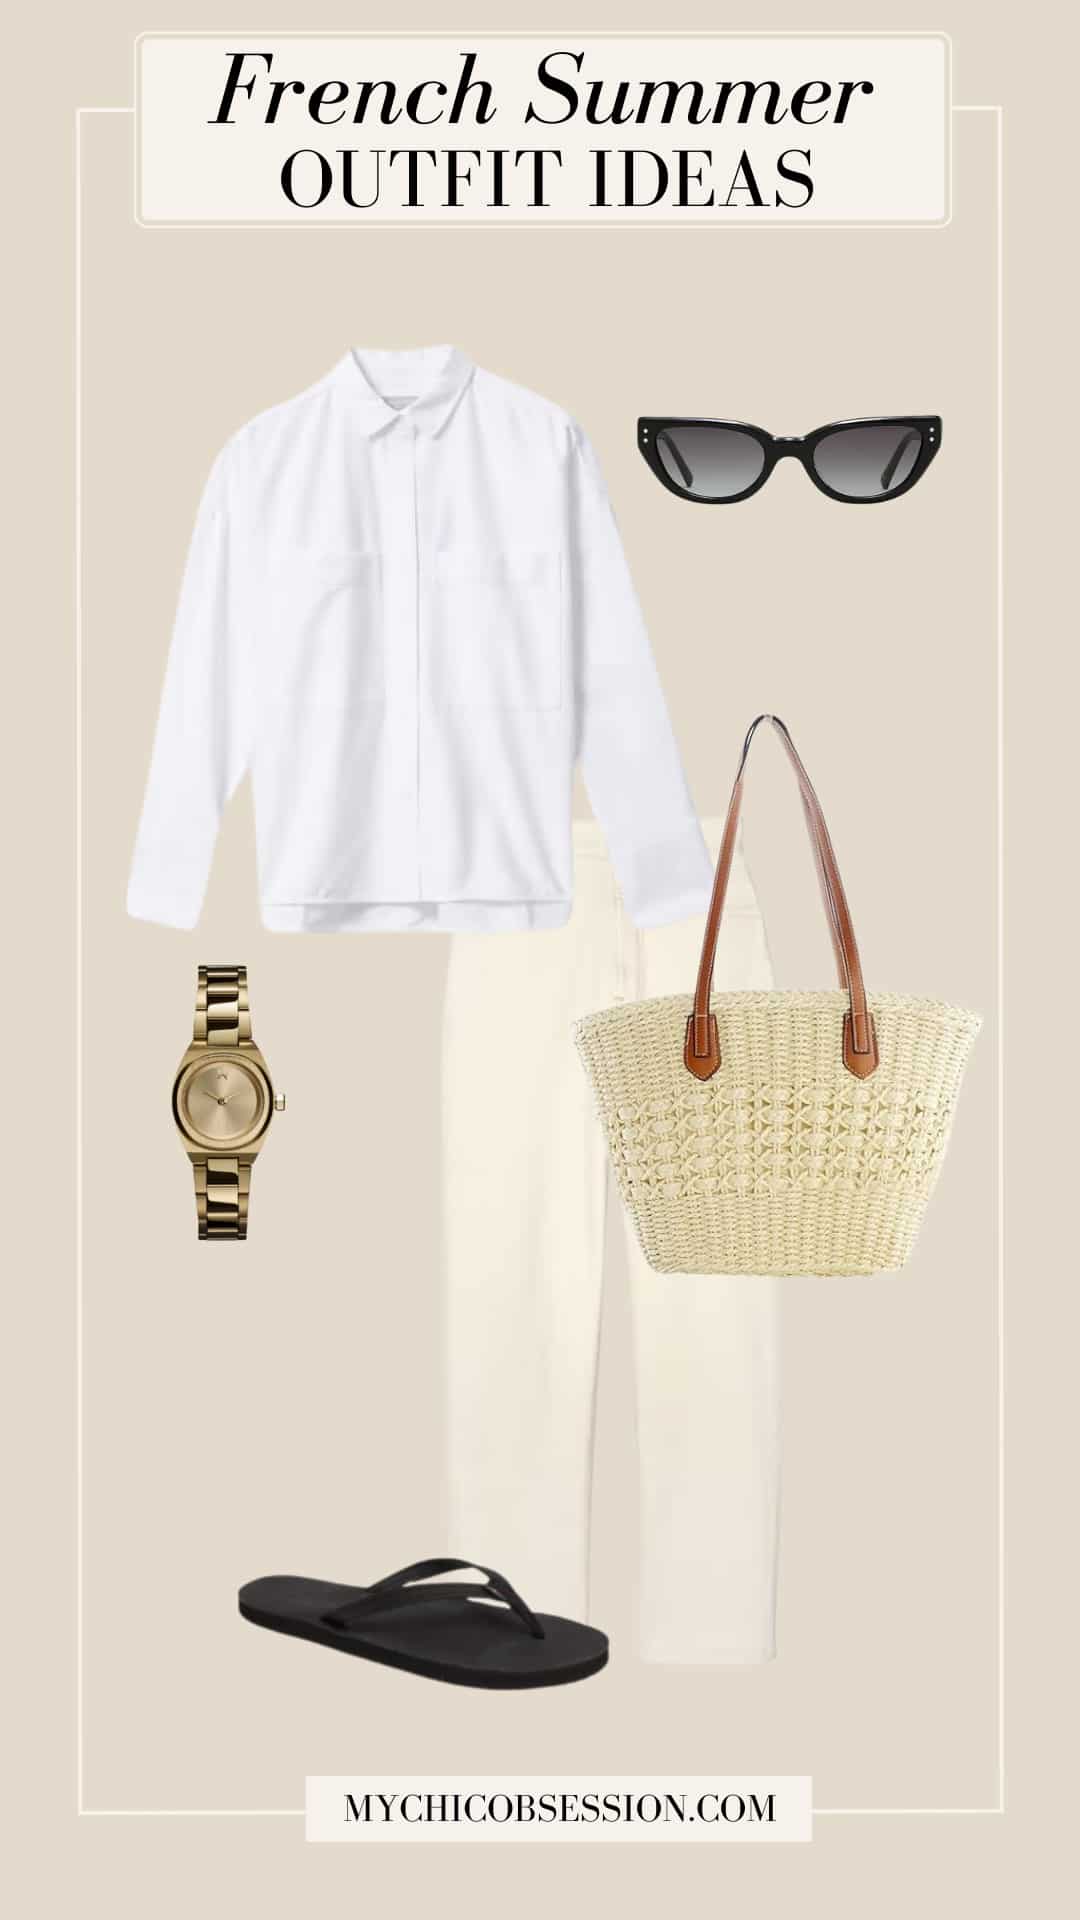 french summer outfit - oxford shirt basket tote light jeans gold watch flip flops 